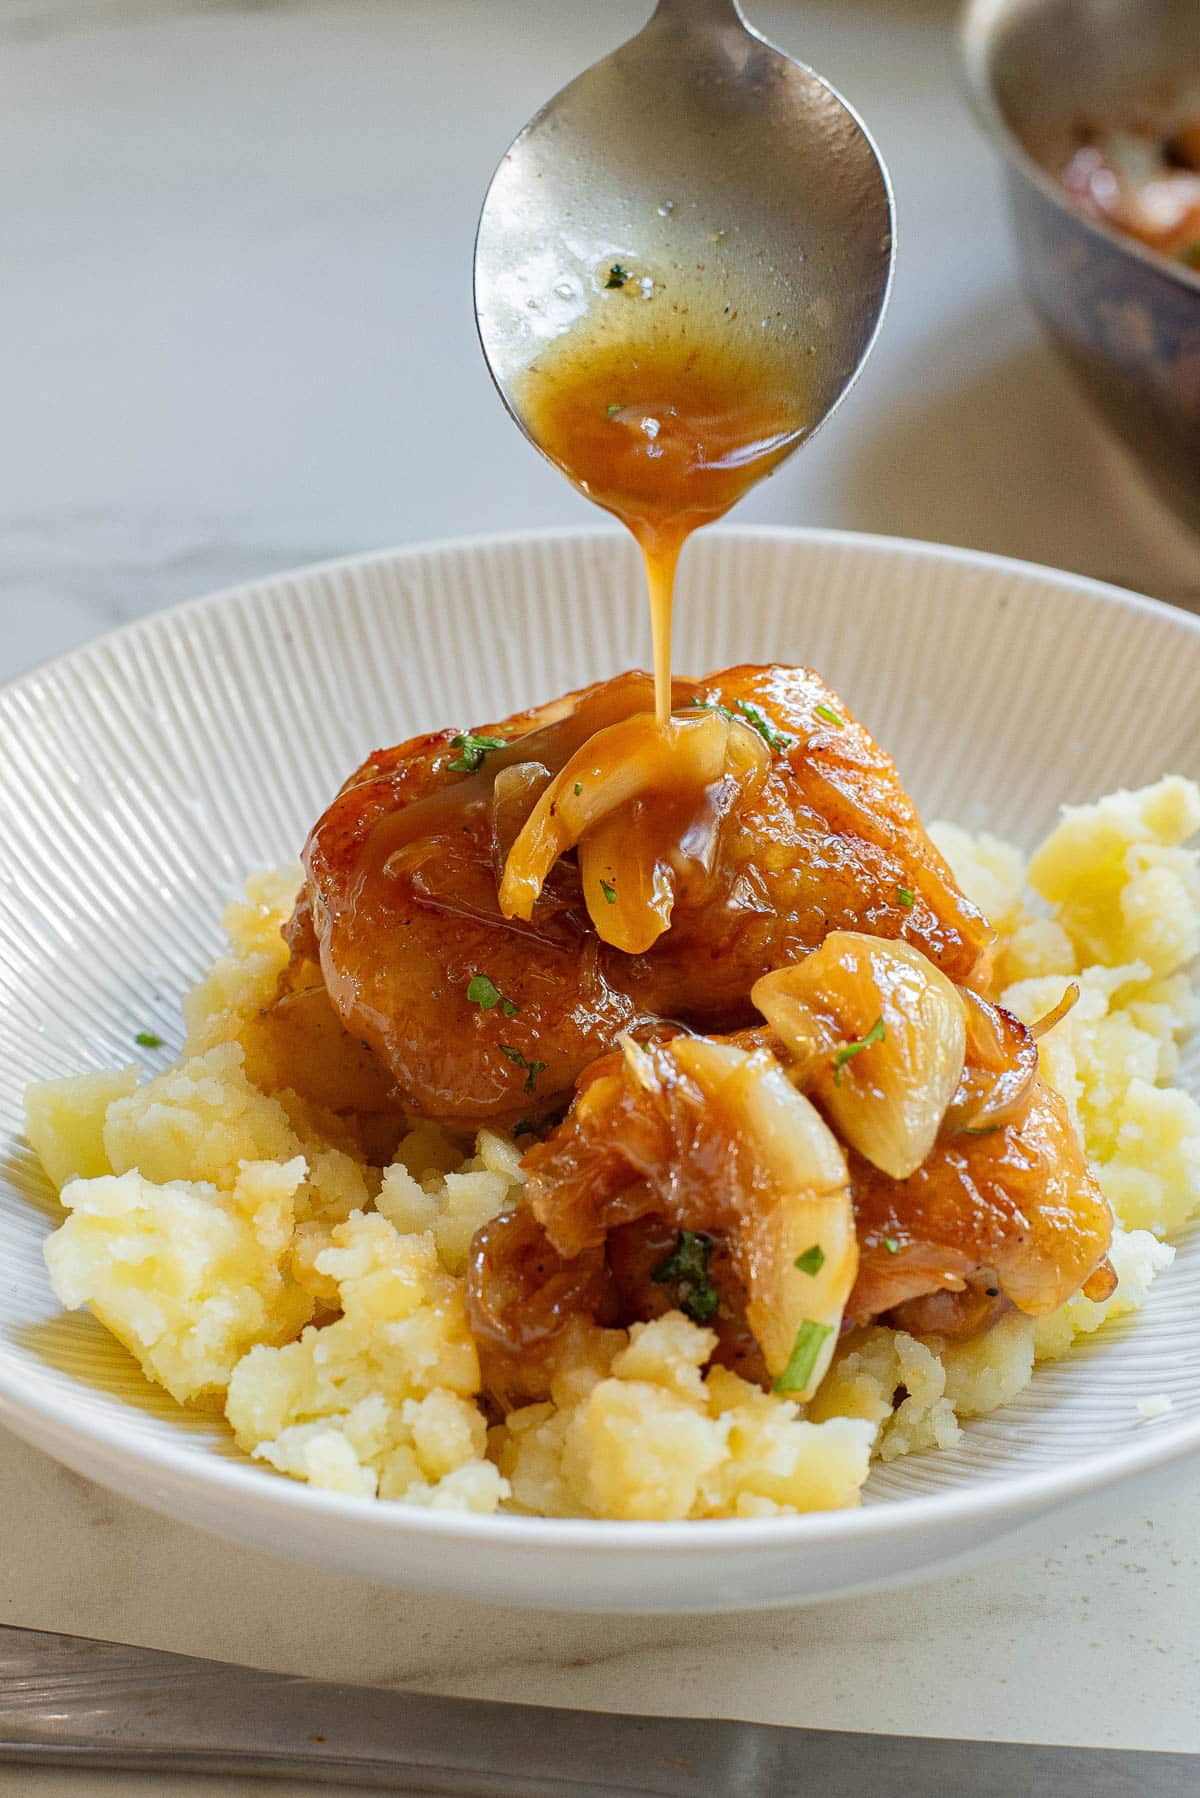 Chicken thigh over mashed potatoes with spoon dripping gravy over dish.